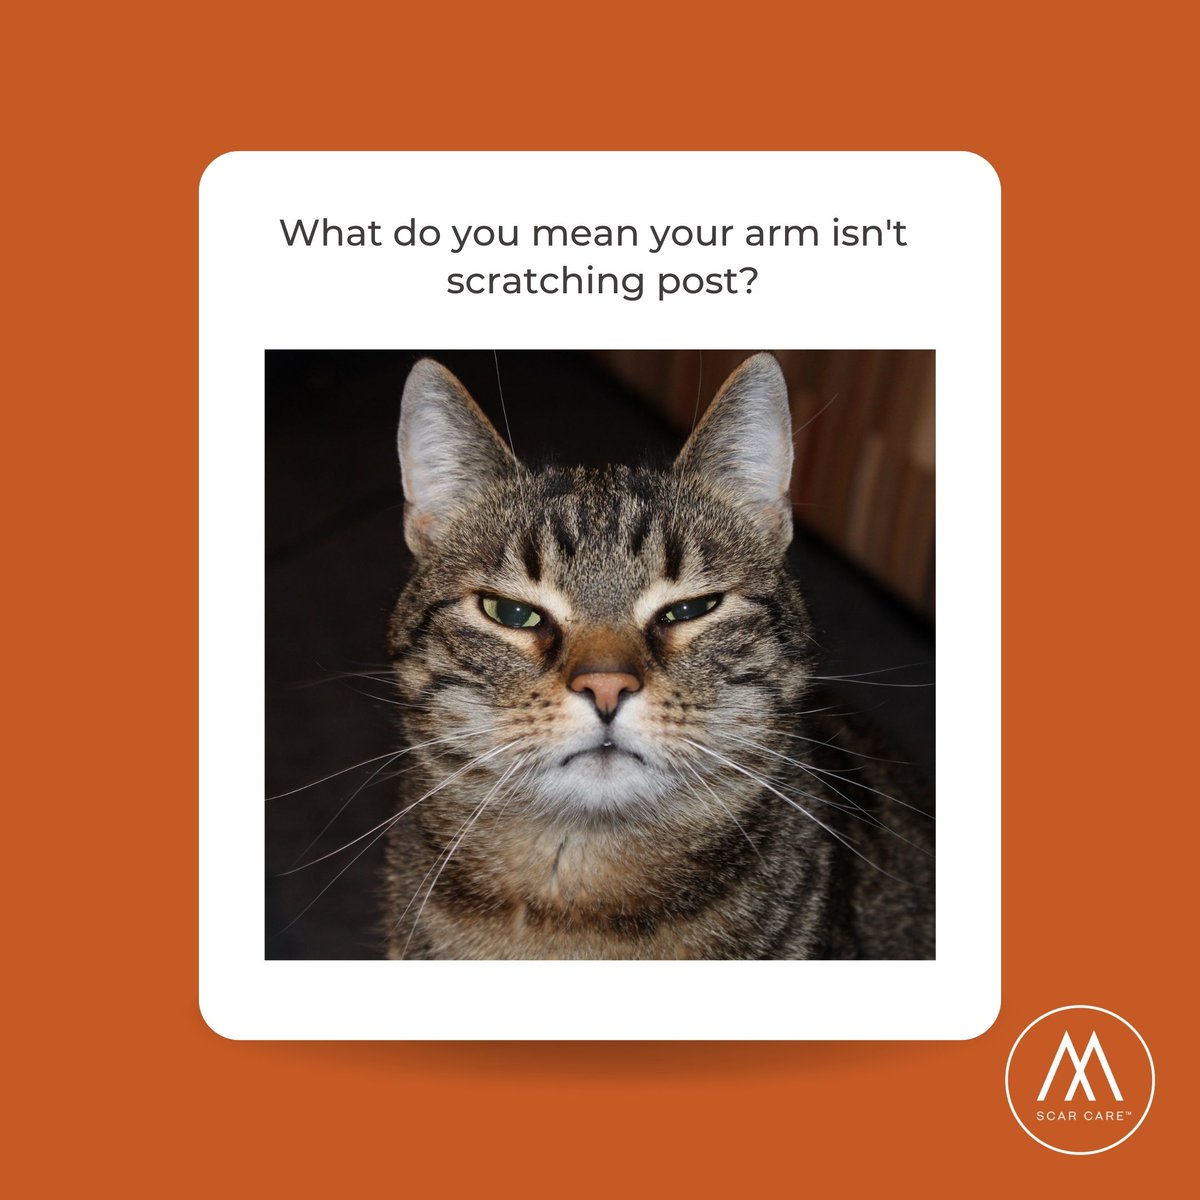 What do you mean your arm isn't a scratching post? 😹 We sure do love our furry friends, but sometimes their claws can leave us with unwanted marks. Don't worry though, our scar cream can help ensure those marks don't last forever! 😉👌 #CatHumor #ScratchMarks #ScarCare